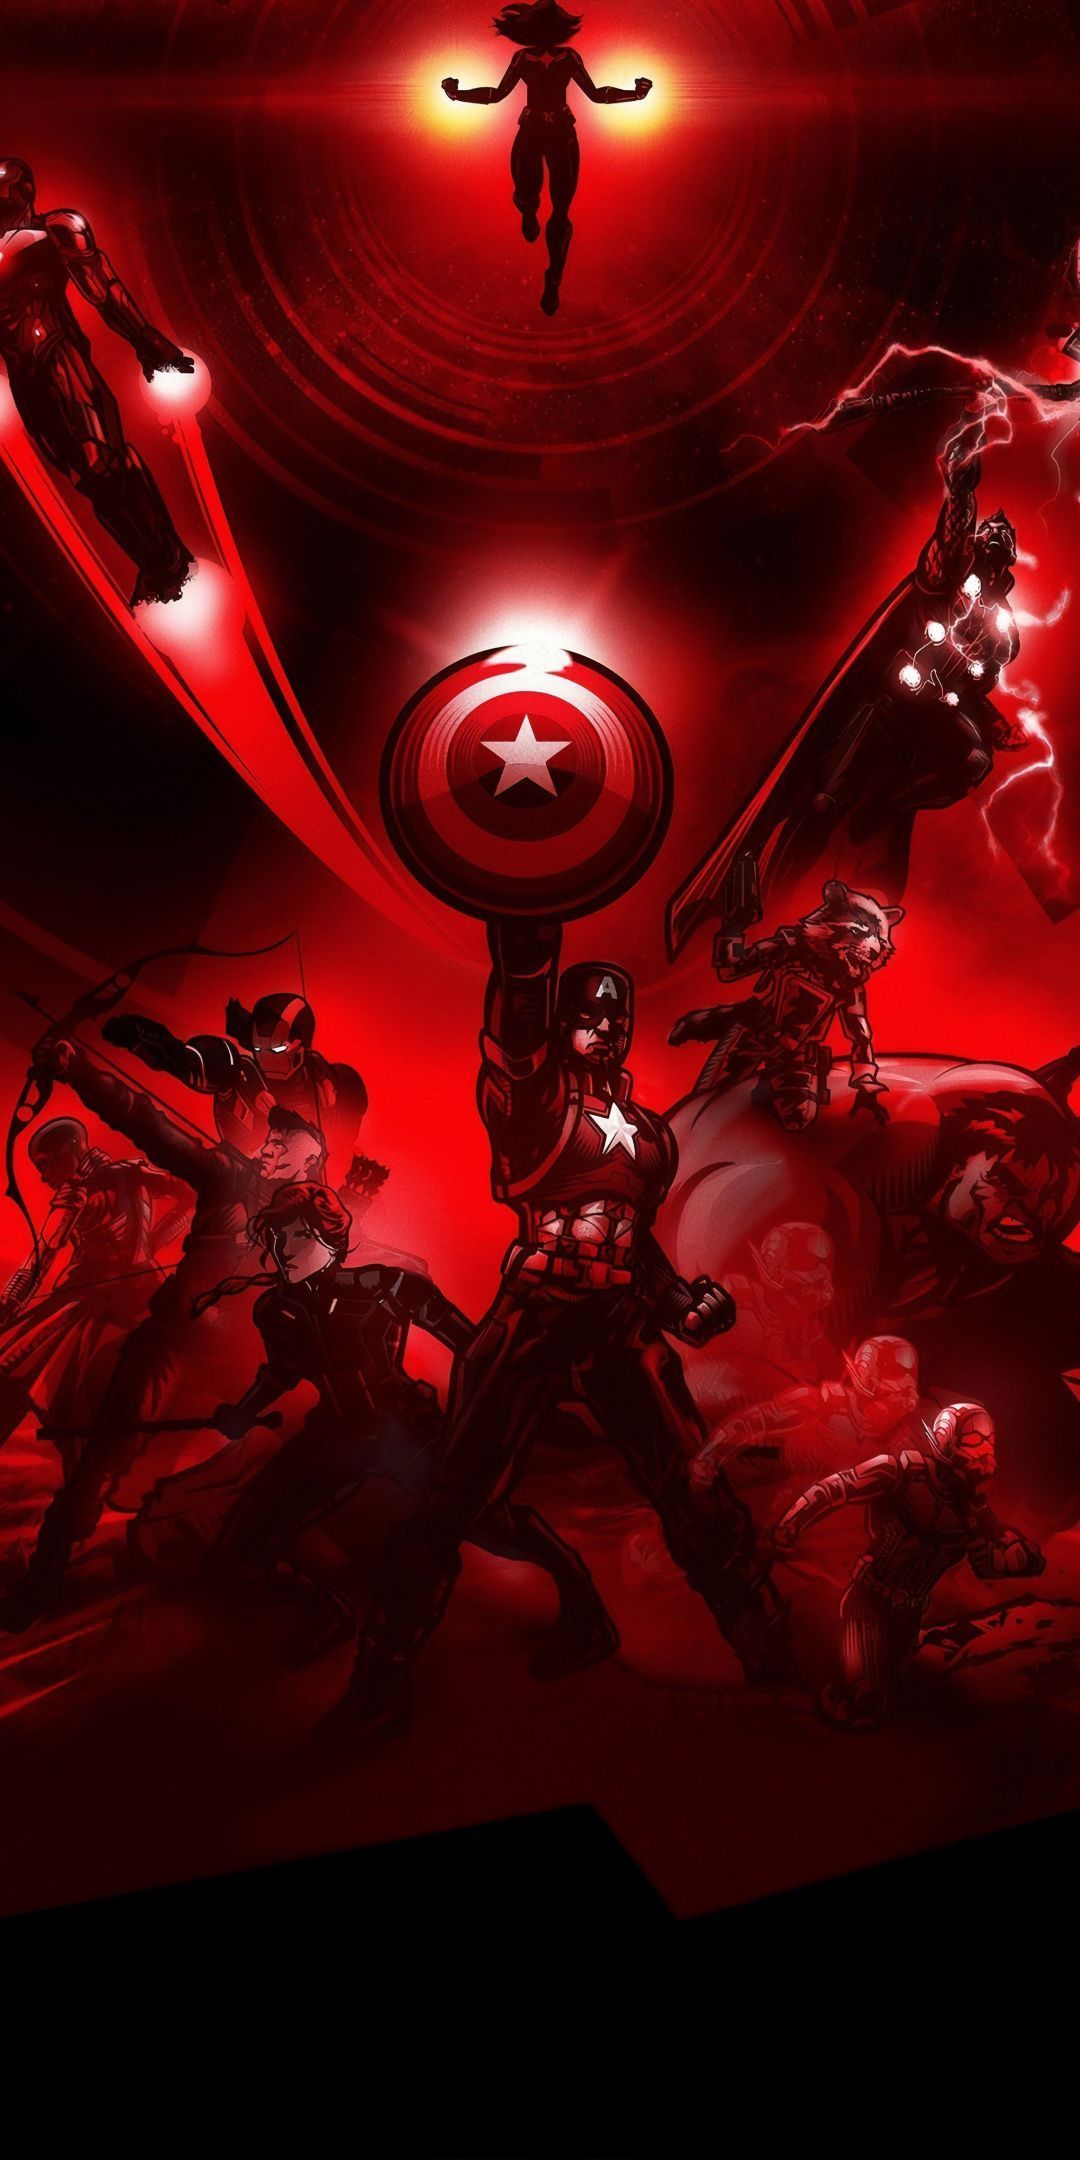 Captain America and the Avengers in a red light. - Marvel, Avengers